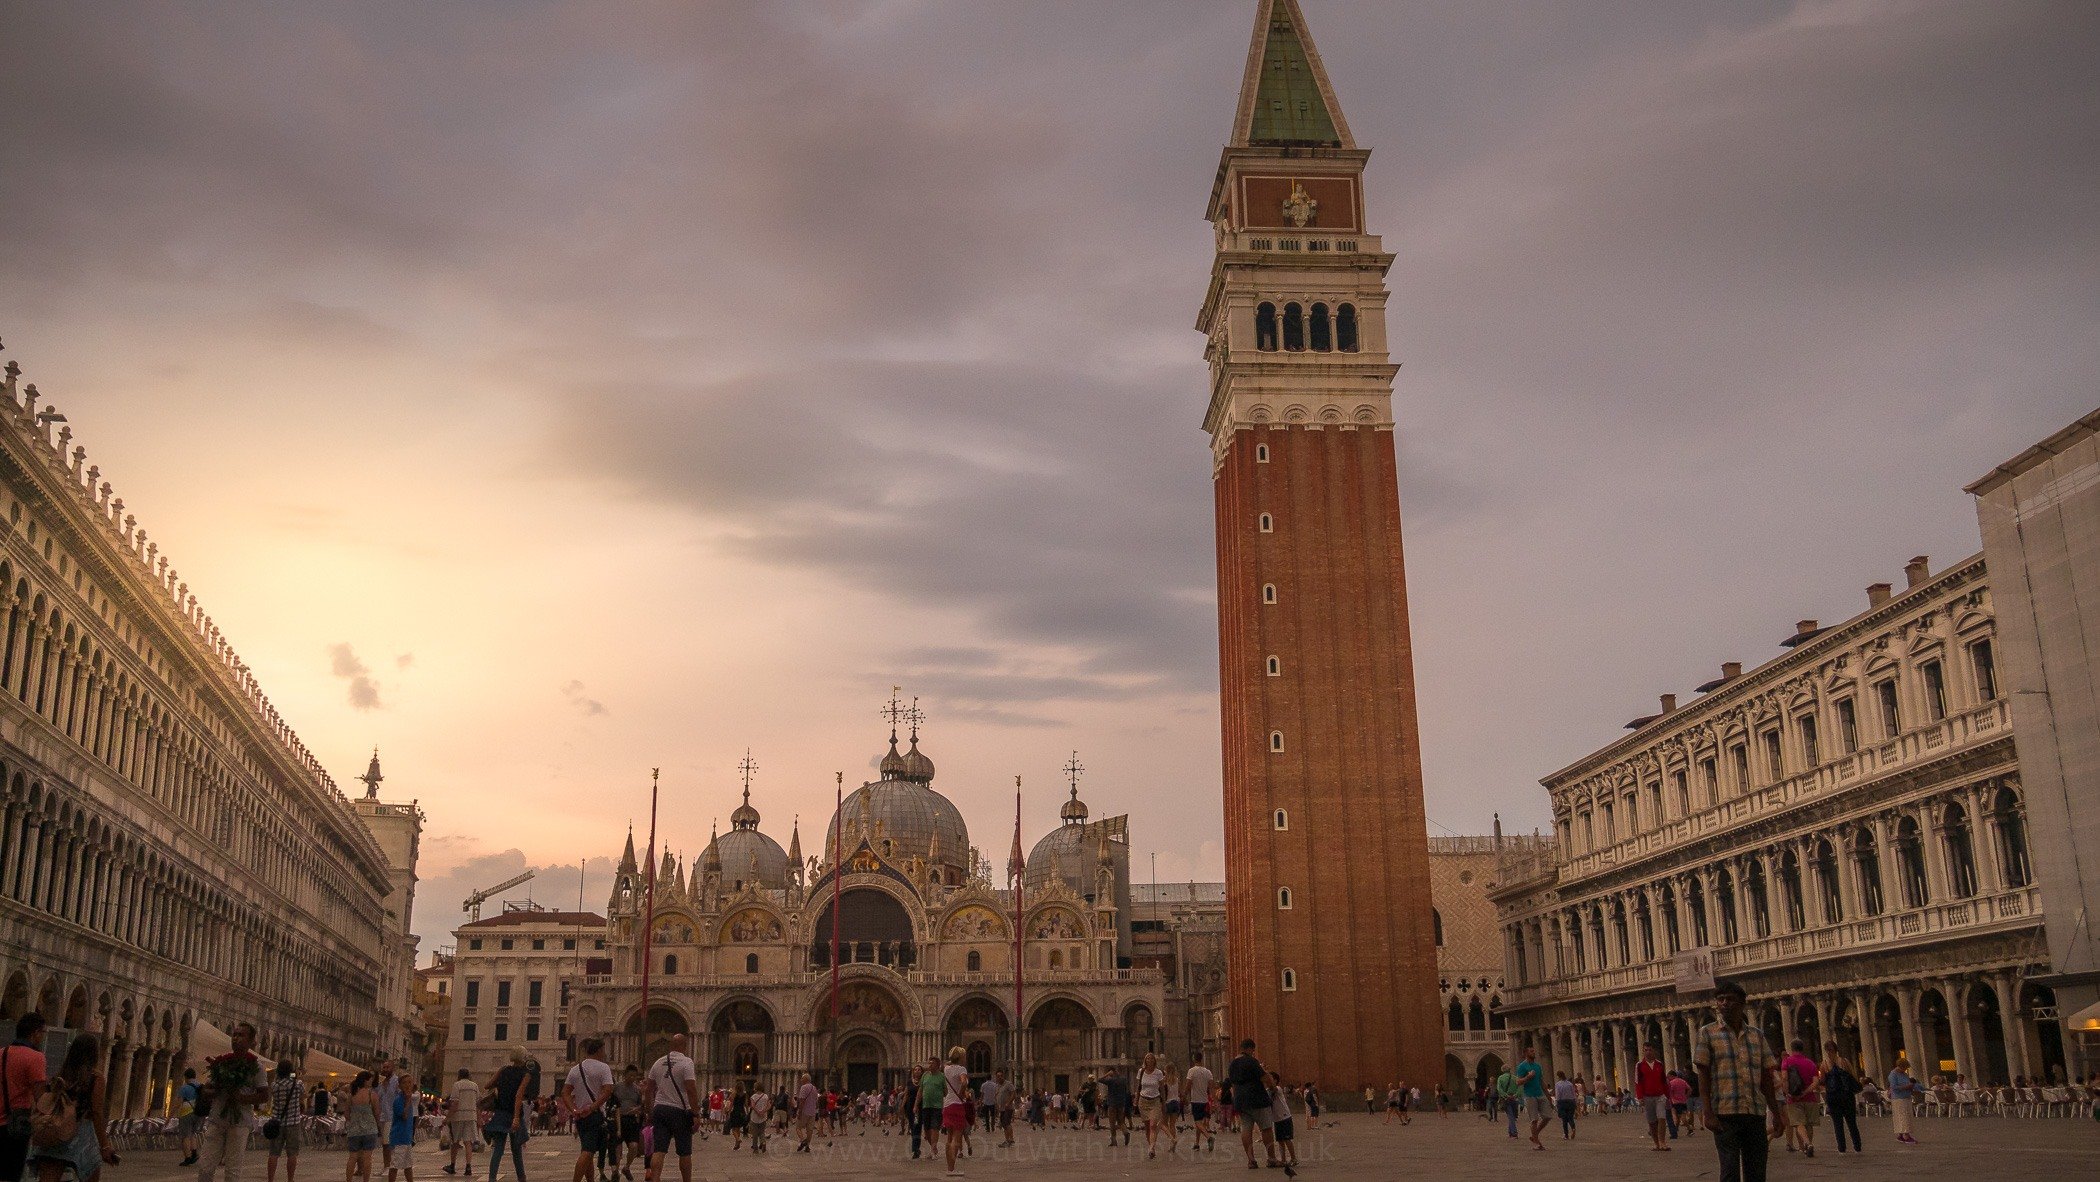 St Marks Square in the evening